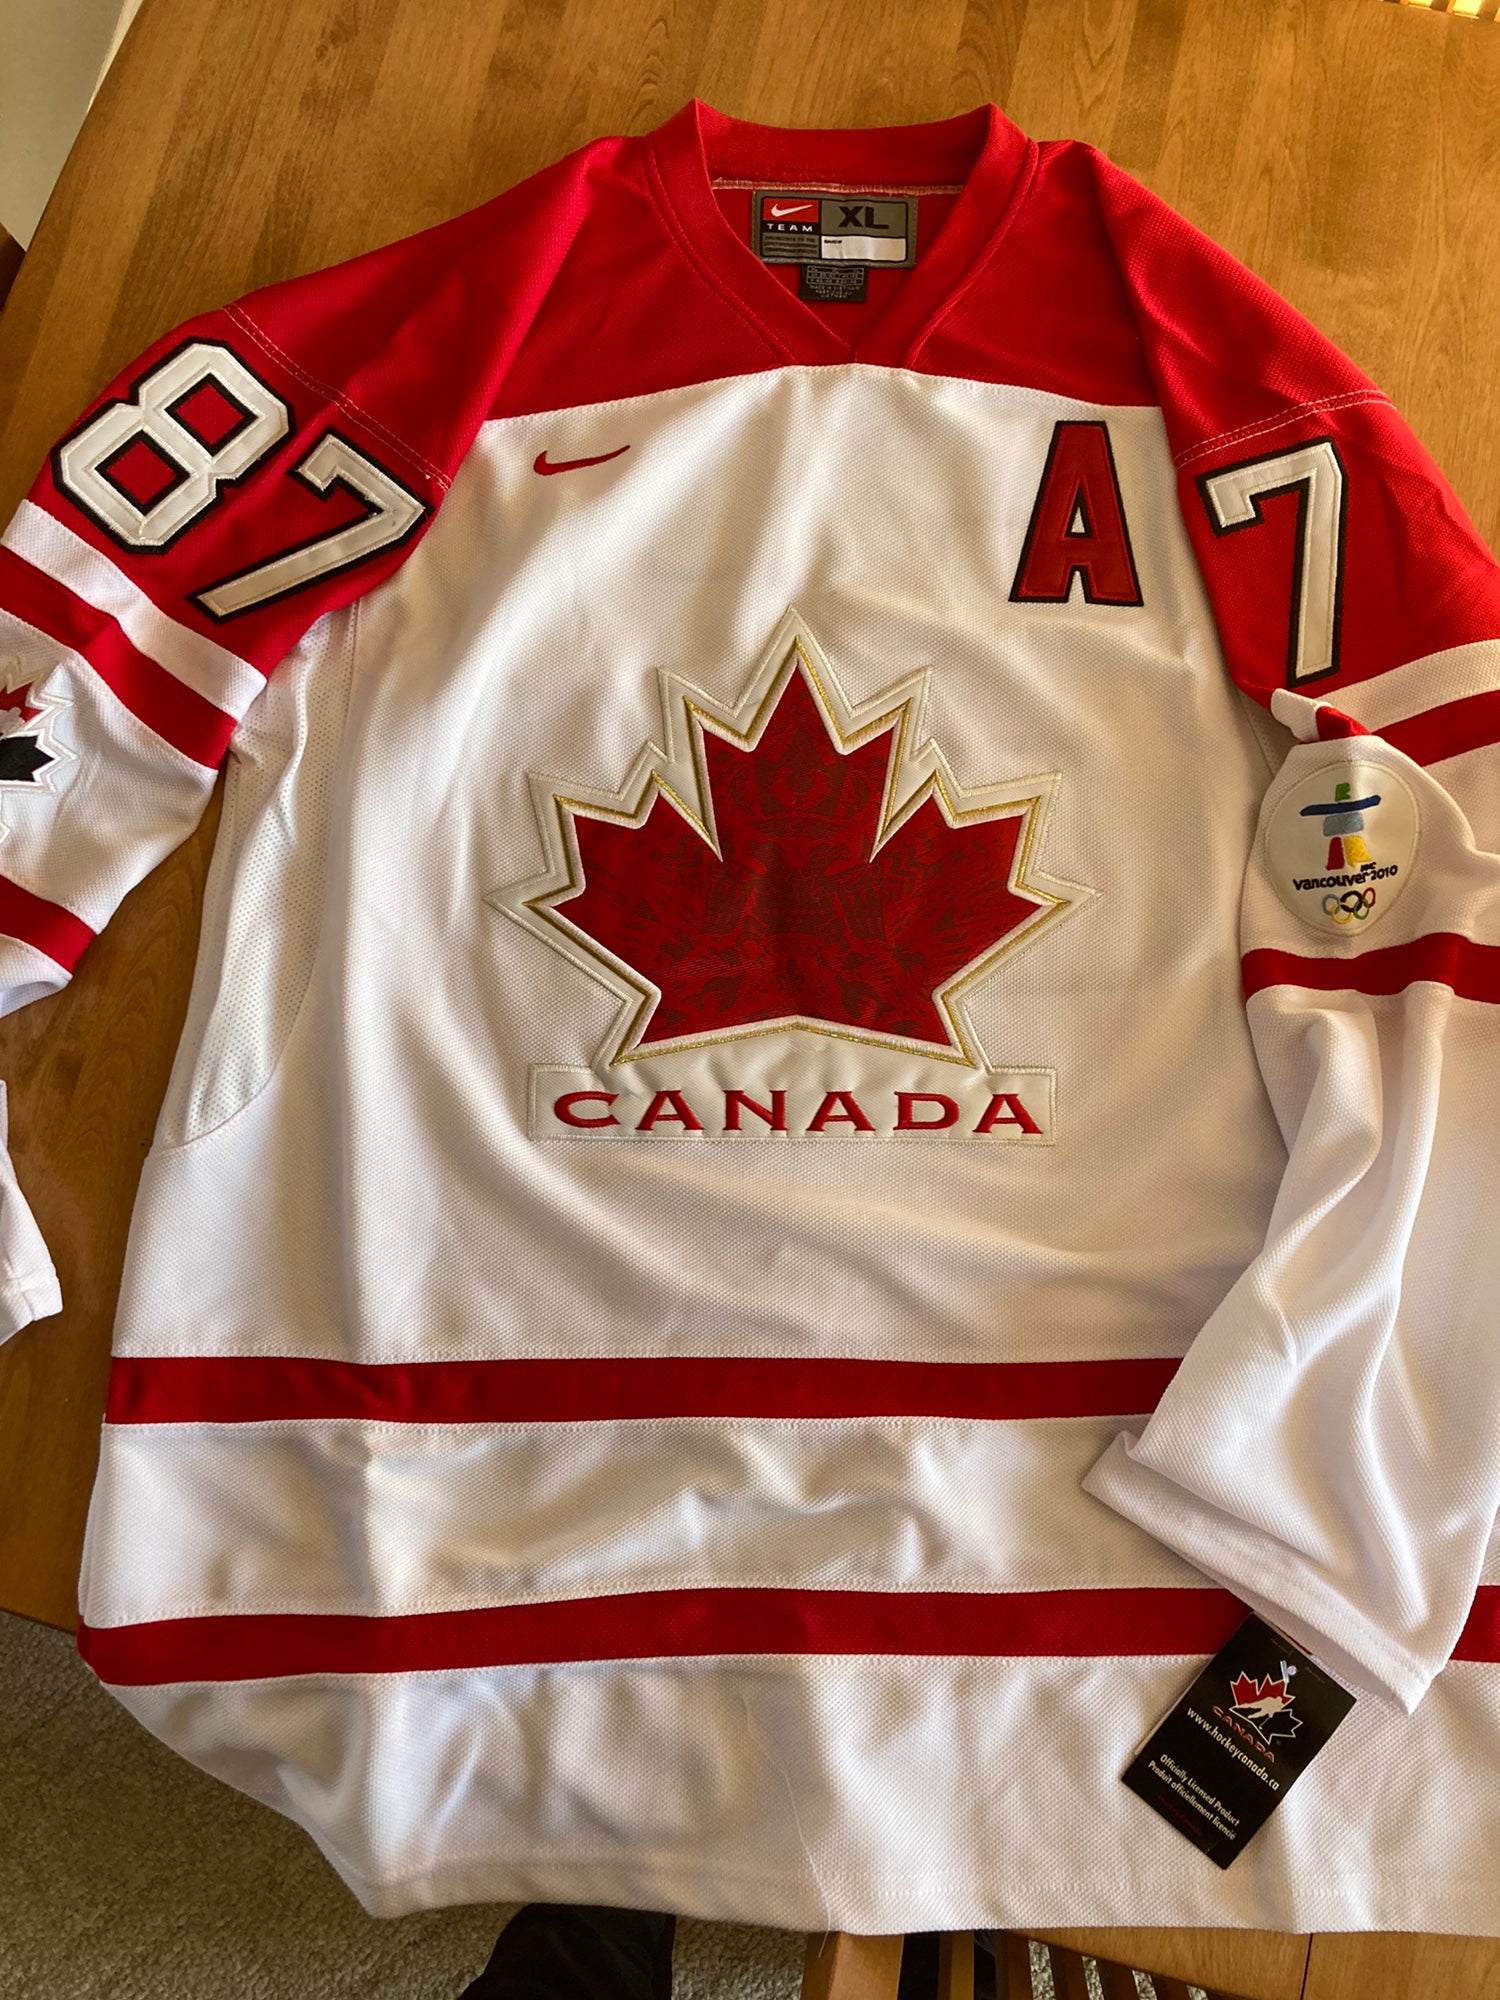 Nike Team Canada 2010 Vancouver Olympic Ice Hockey Shirt Jersey Red Stitched